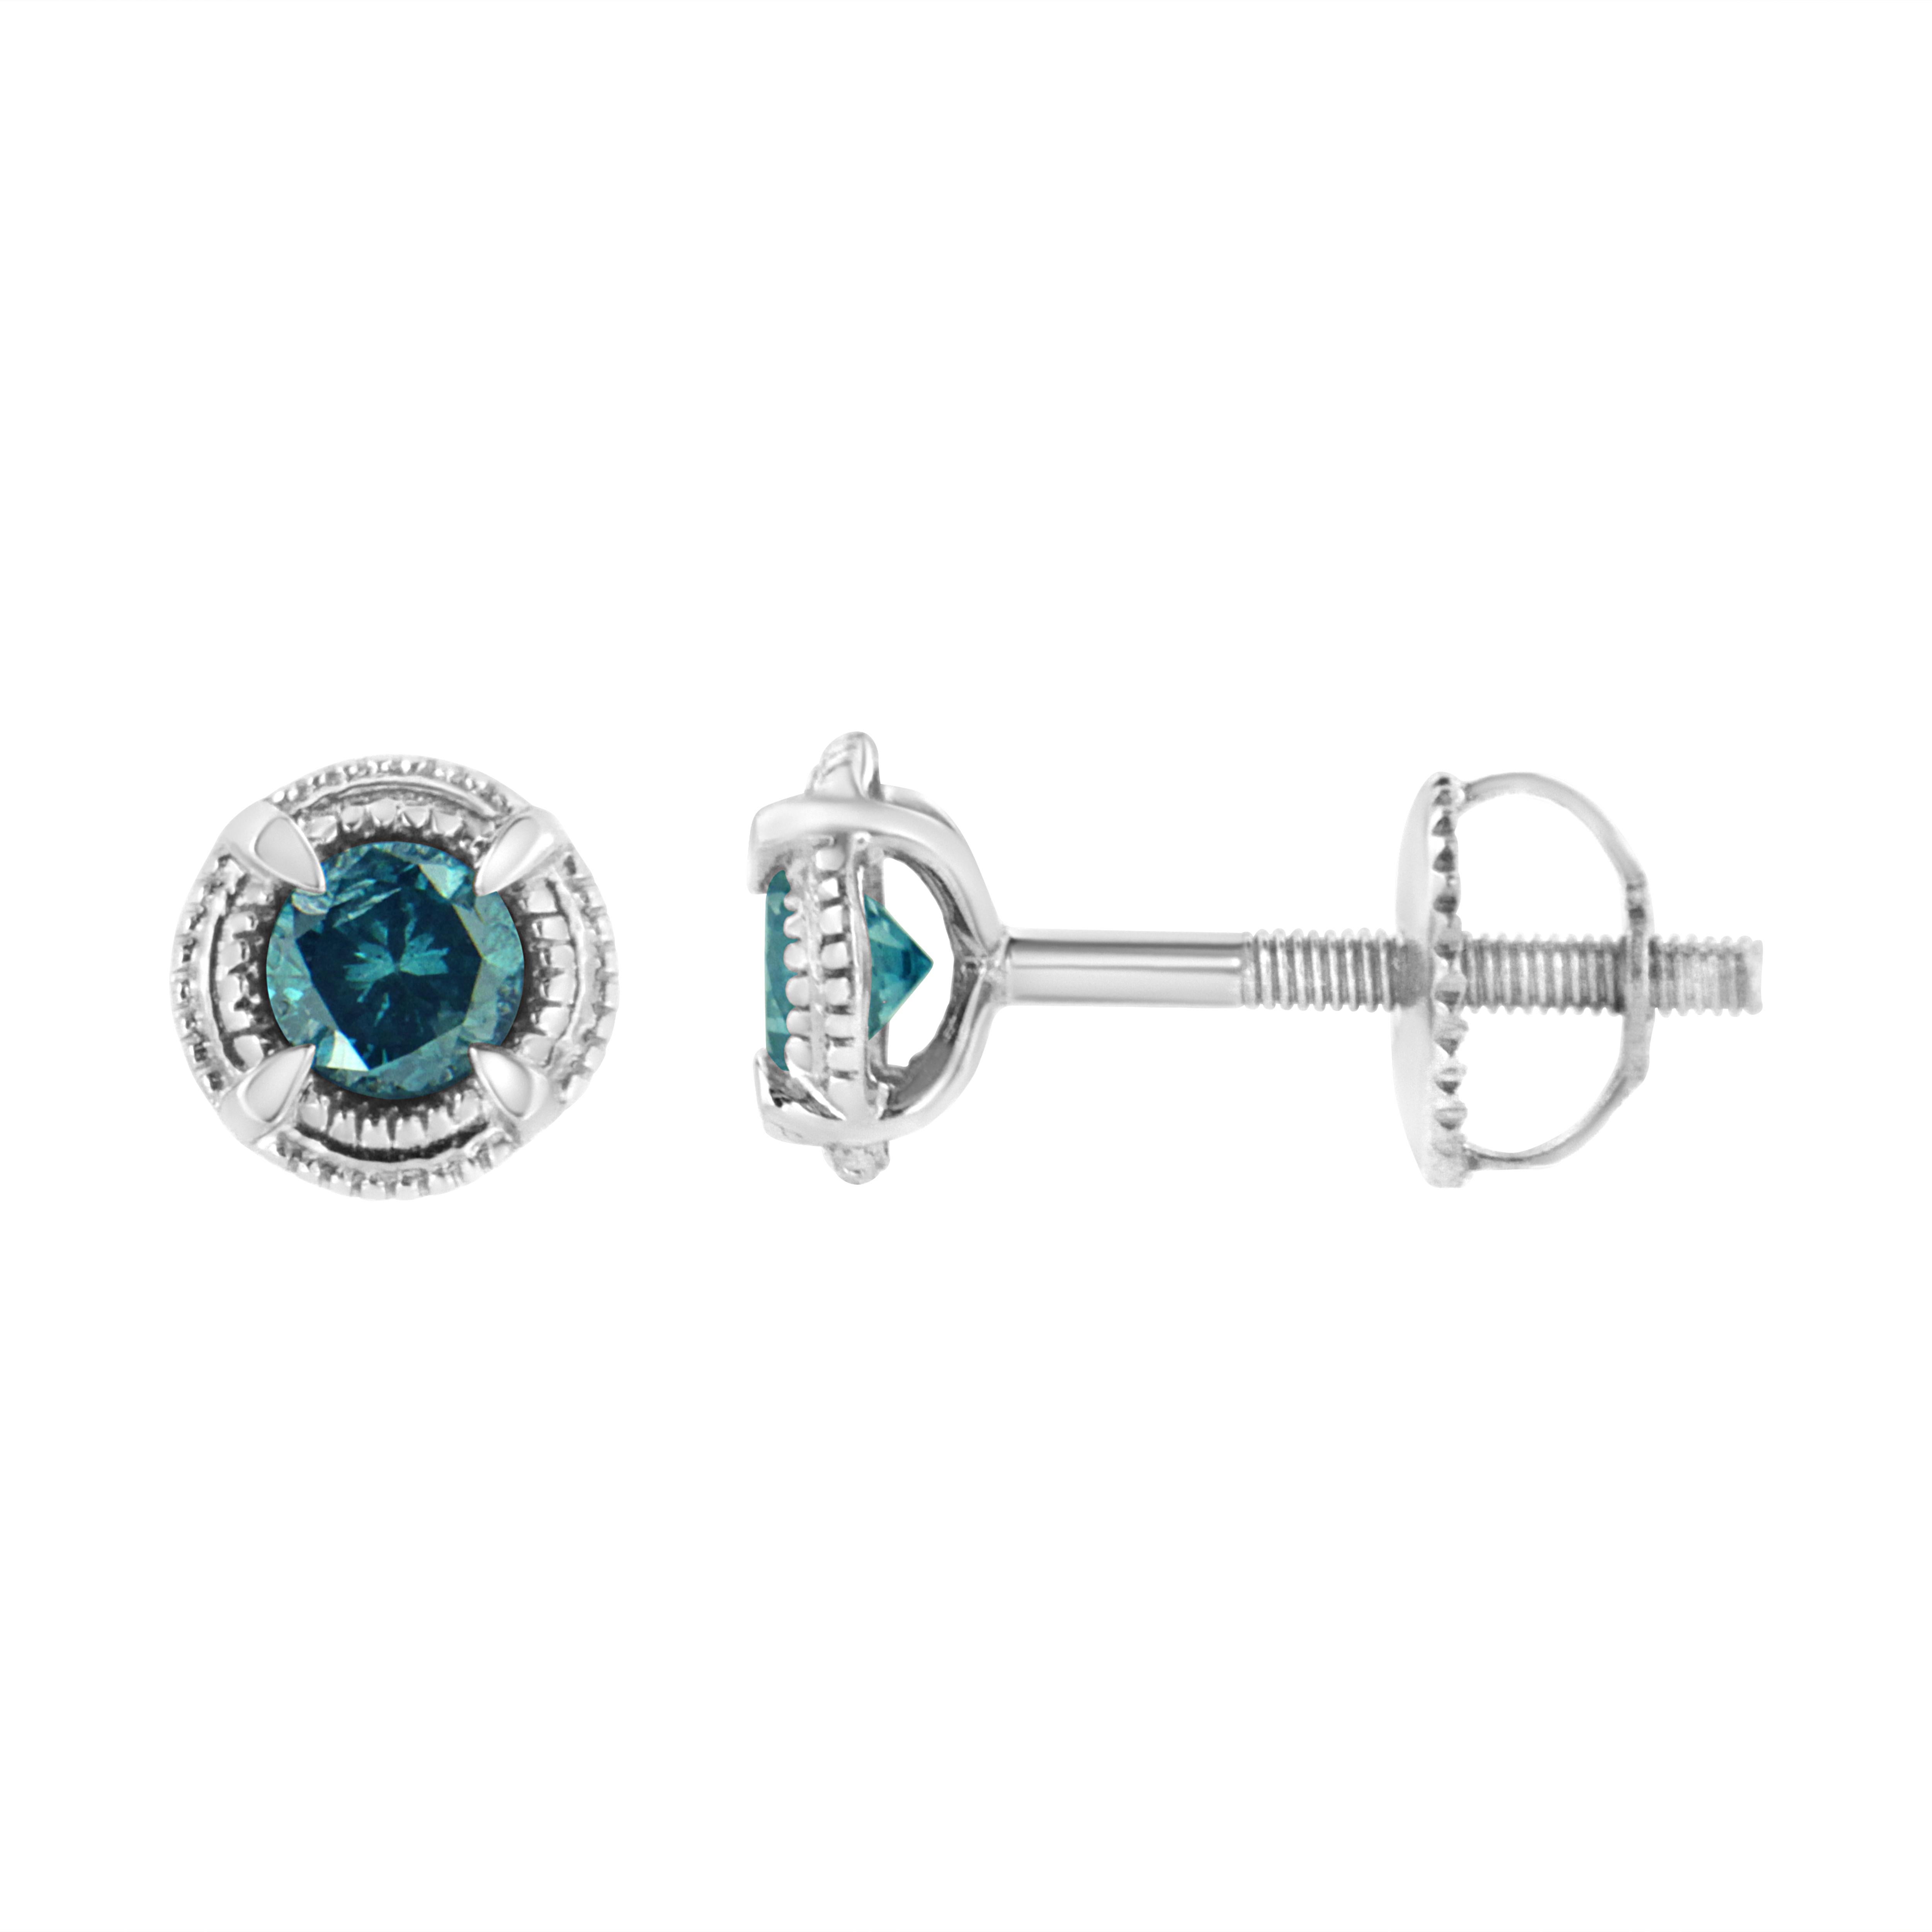 A modern classic, these gorgeous rhodium plated 92.5% sterling silver stud earrings feature round shape diamonds for a 1 1/2 carat total weight - how much impact would you like? These sparkling solitaire style diamonds are come with treated blue